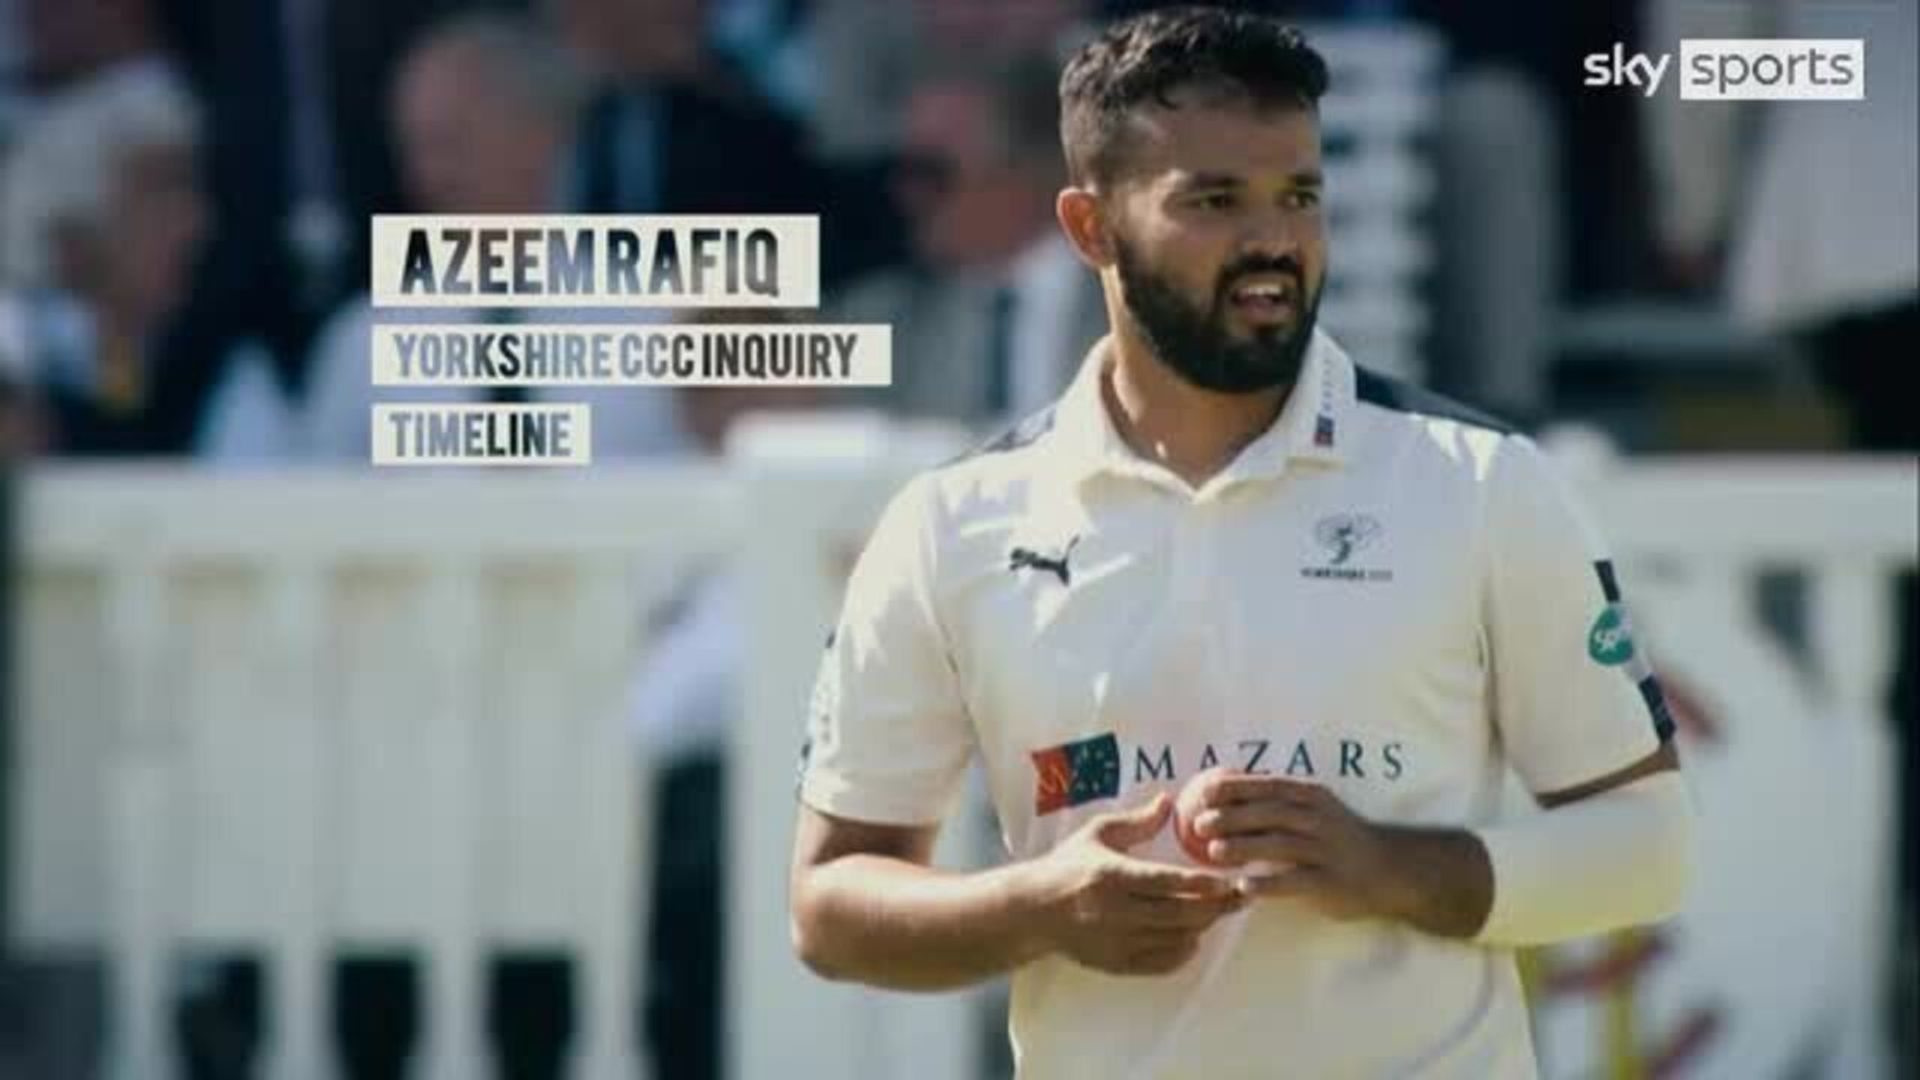 Rafiq’s Yorkshire CCC inquiry timeline | Atherton: It is not overSkySports | Information